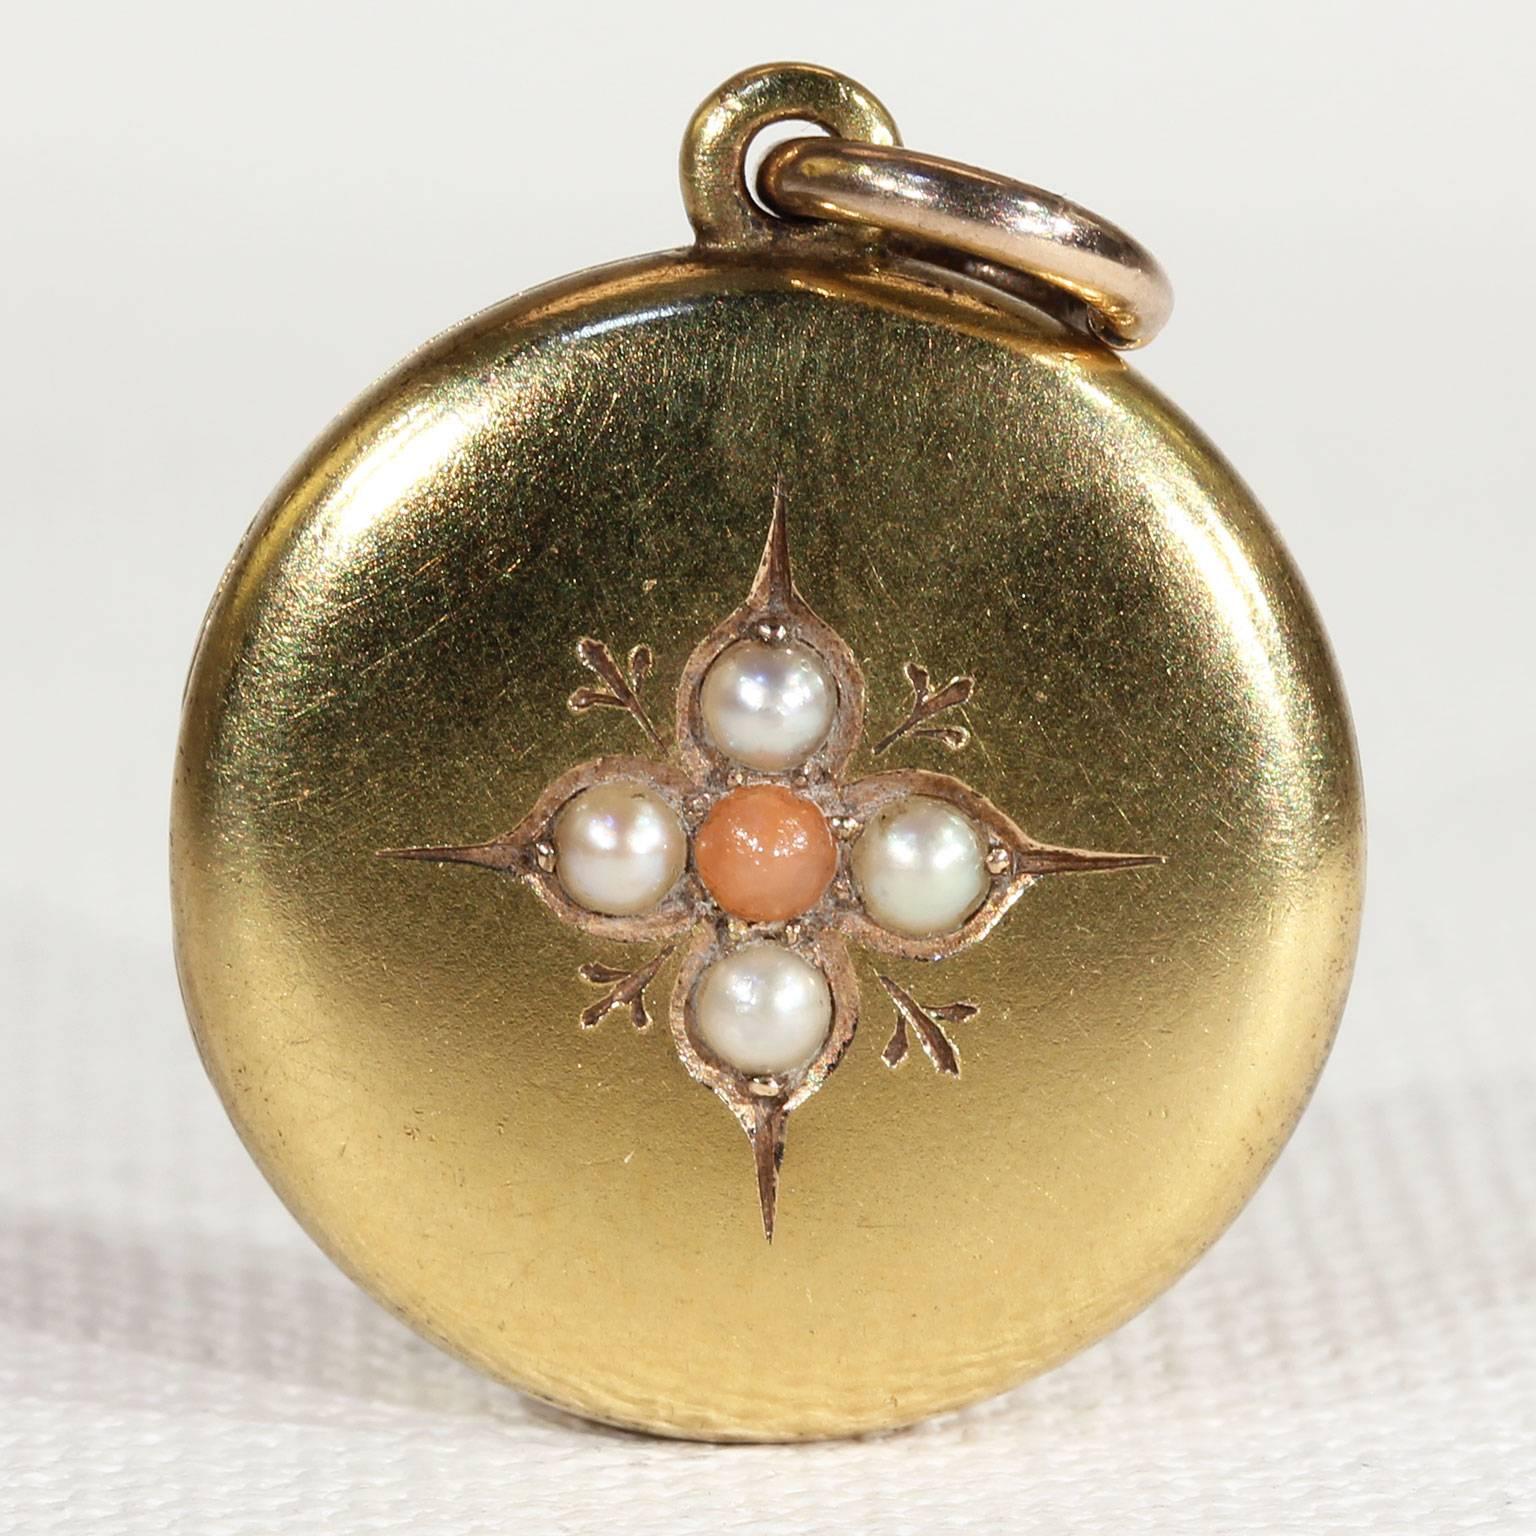 This fabulous locket showcases an elaborate and detailed anchor in rich blue enamel on one side and is set with four smooth and glowing pearls and a cabochon of coral on the other. It was hand crafted in 15 karat gold and is inscribed on the inside